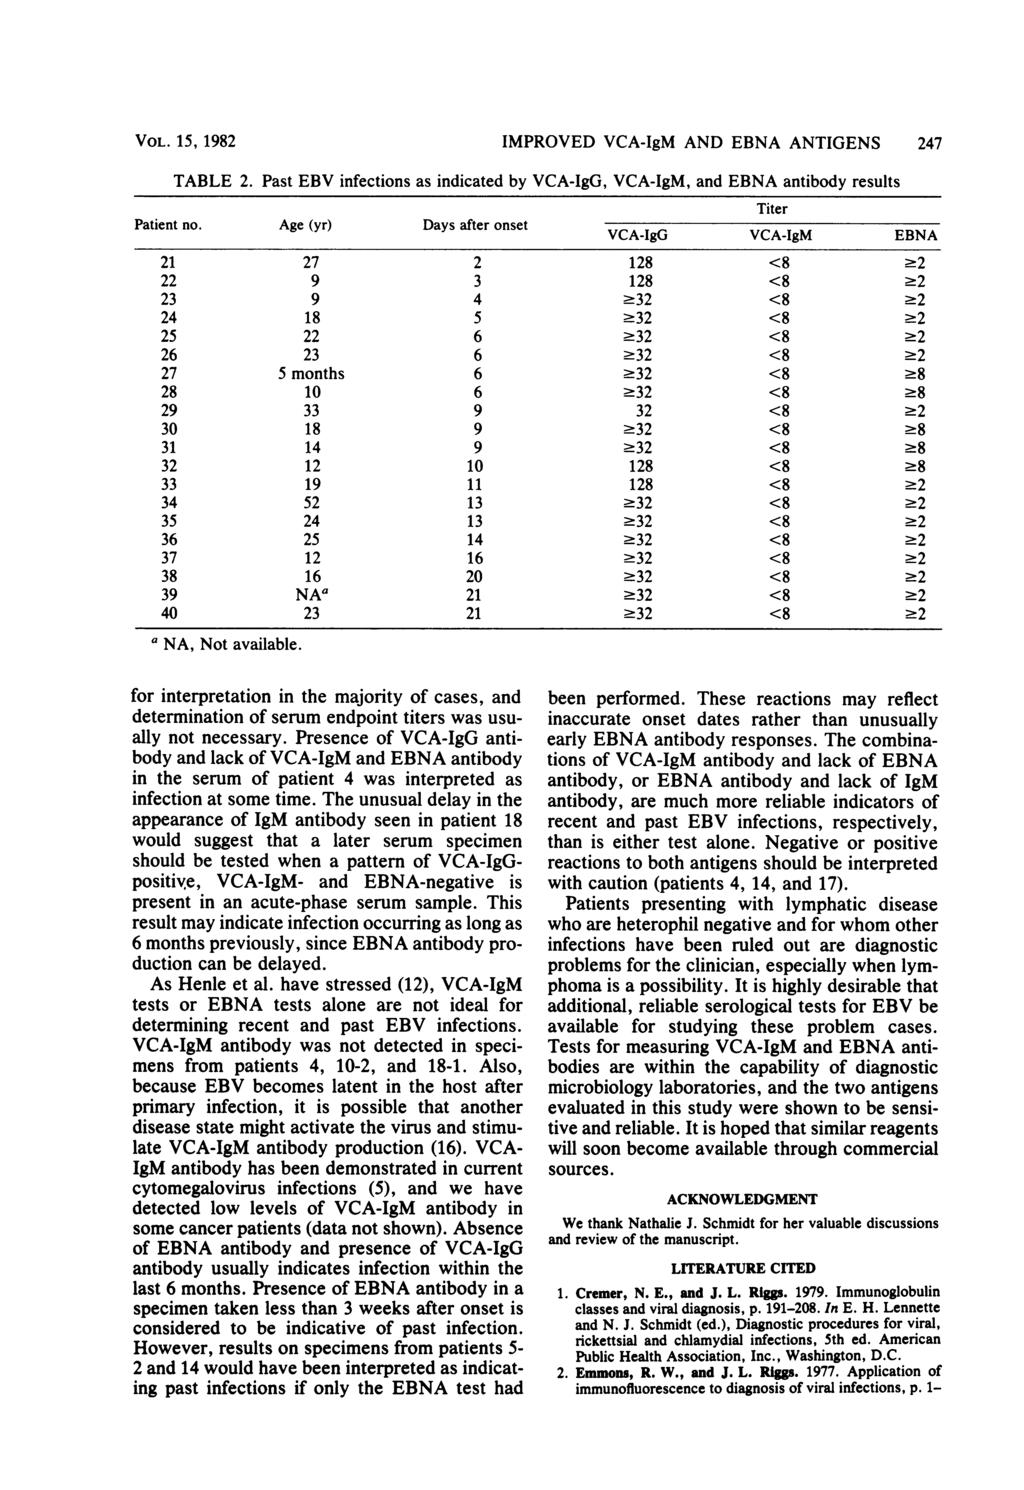 VOL. 15, 1982 IMPROVED VCA-IgM AND EBNA ANTIGENS 247 TABLE 2. Past EBV infections as indicated by VCA-IgG, VCA-IgM, and EBNA antibody results Titer Patient no.